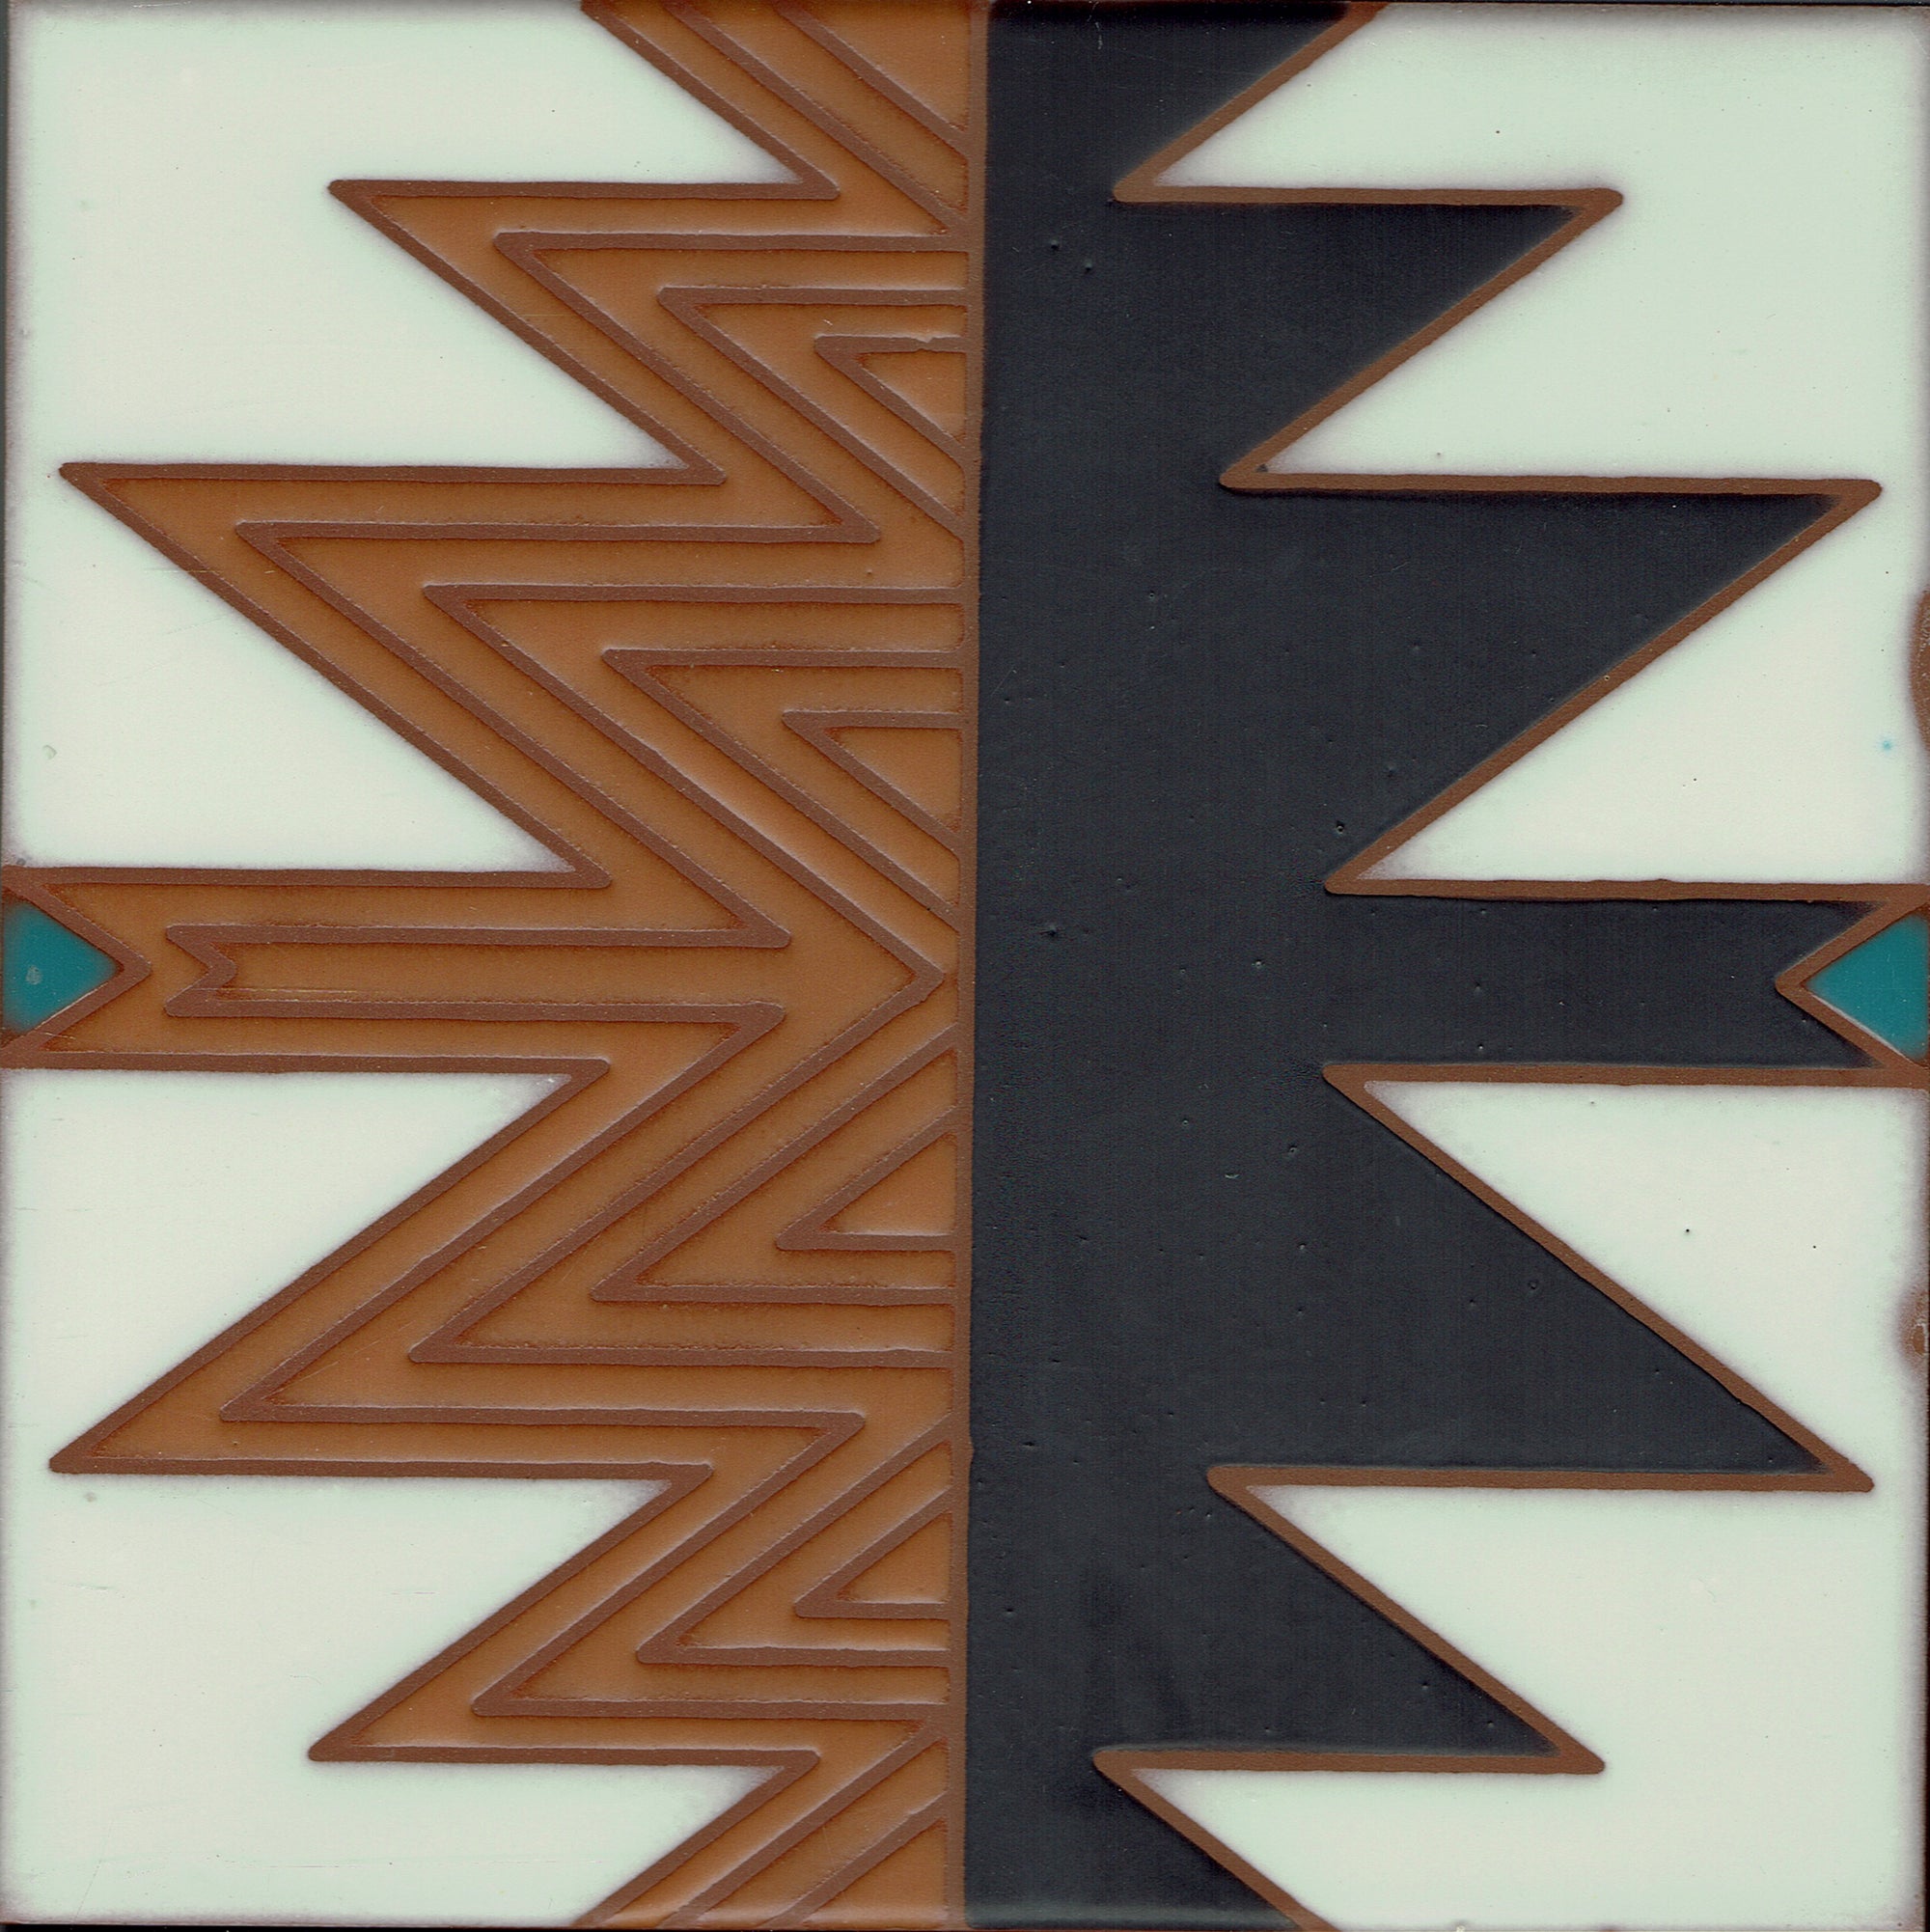 Madras 3 (8"x8") - Handpainted Ceramic Tile Second for Kitchen, Bathroom, Wall & Table Decor